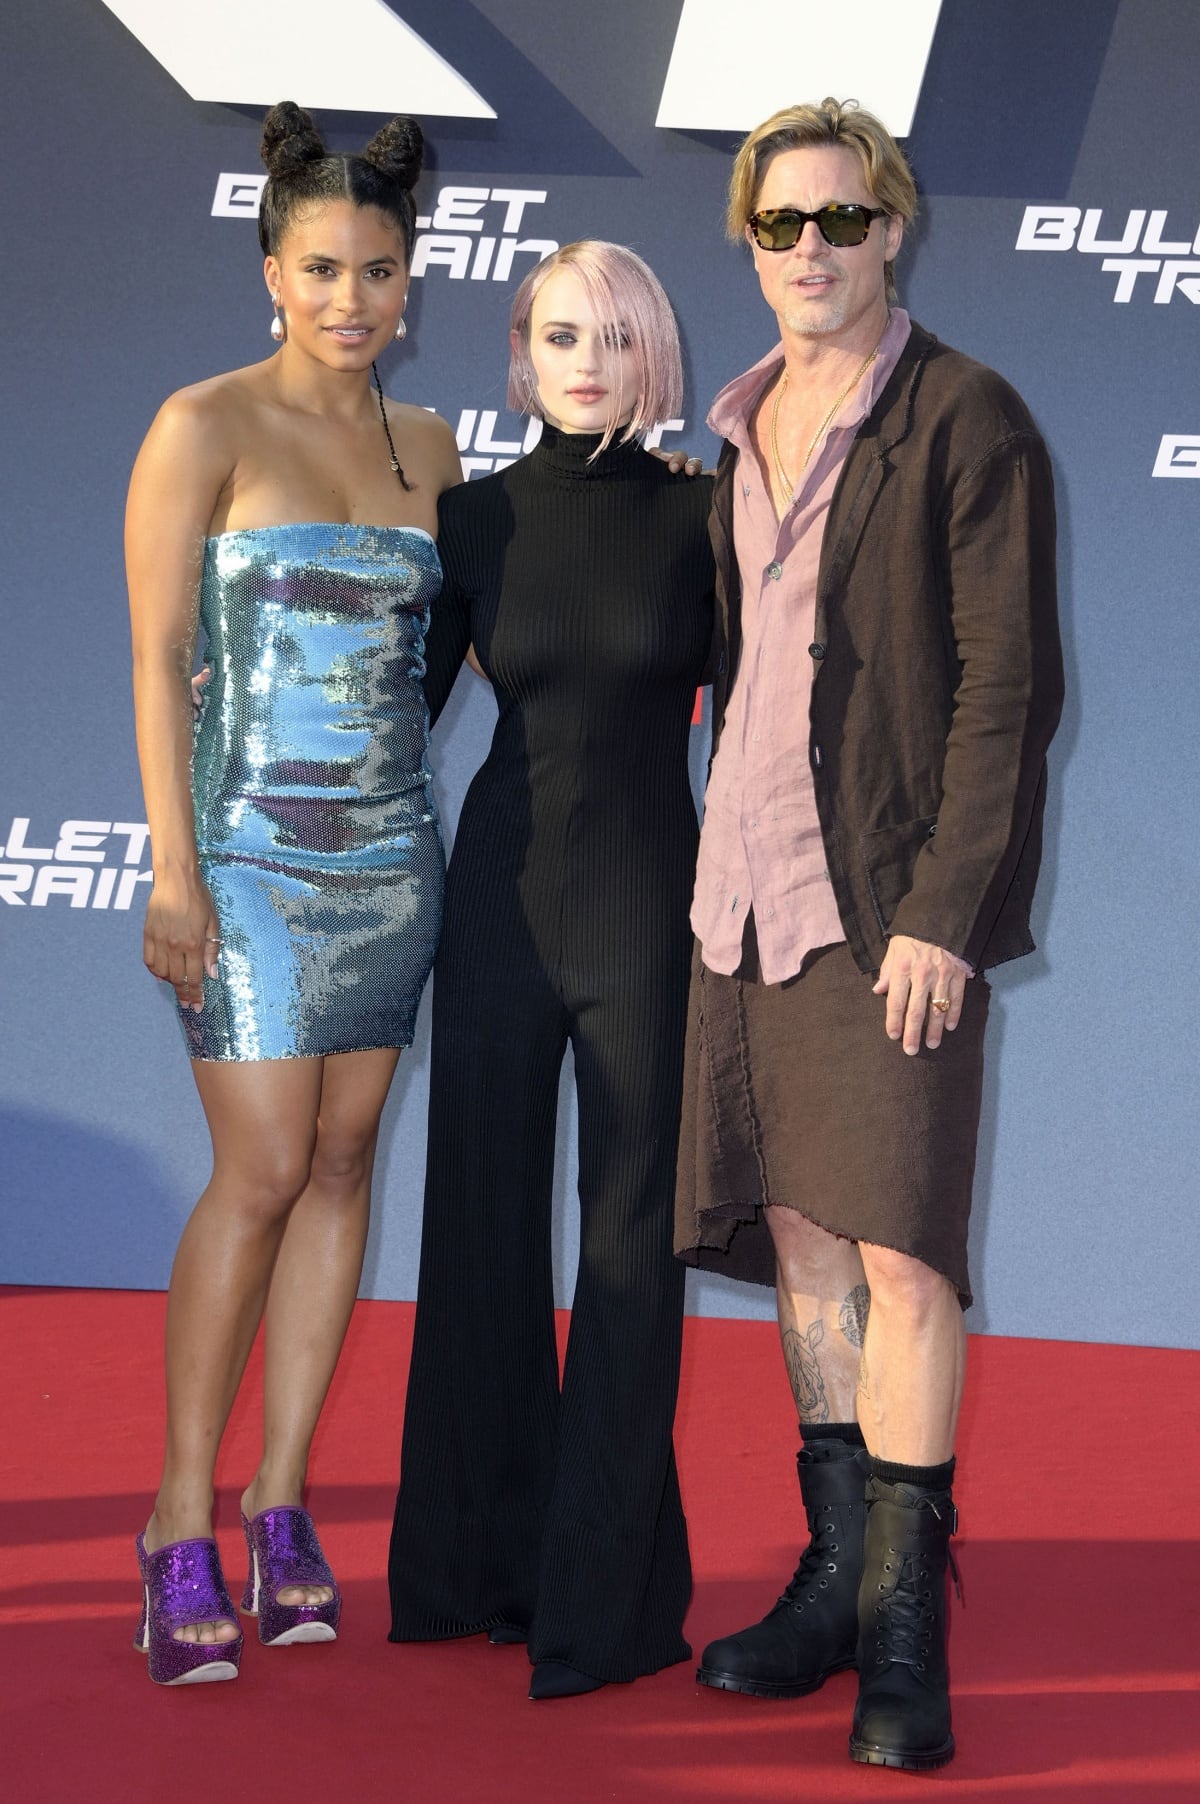 Brad Pitt with co-stars Zazie Beetz and Joey King at the Bullet Train Berlin premiere